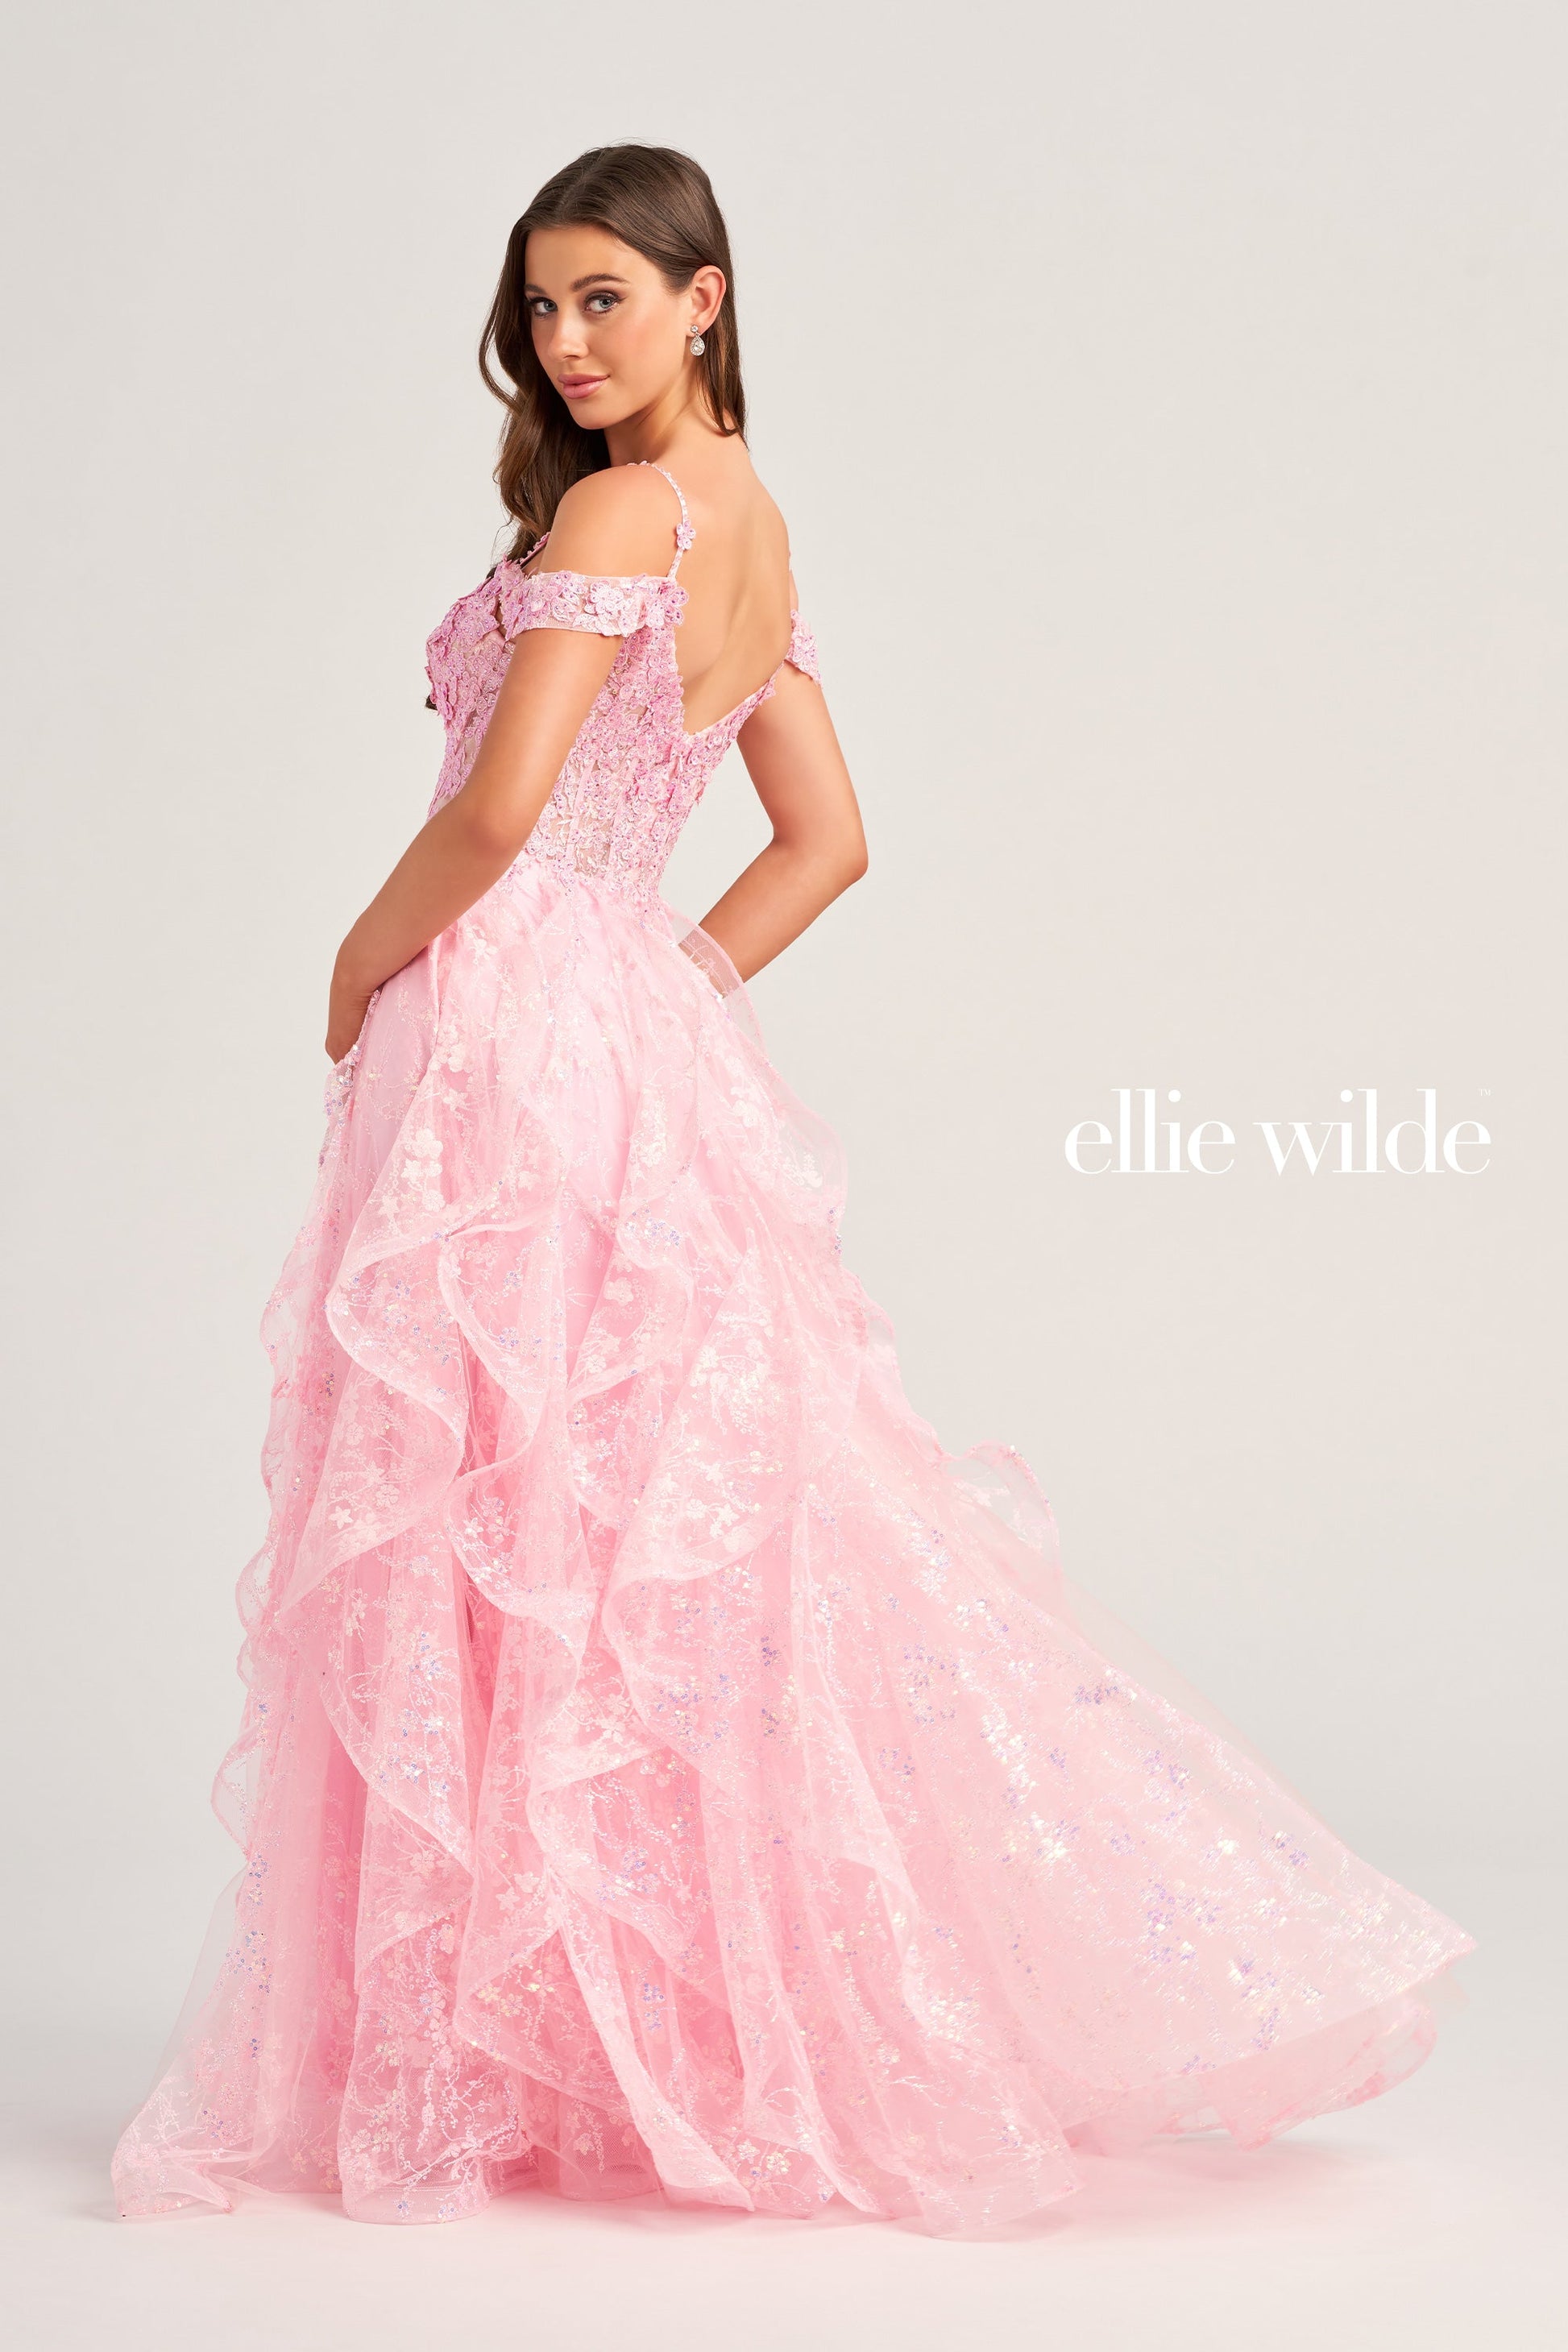 This Ellie Wilde EW35218 prom dress is a show-stopper. It features a sheer corset bodice with stone accents, lace appliques, and sequins. The detachable draped off-shoulder straps perfectly match the plunging sweetheart neckline. A-line silhouette in a long cracked ice tulle skirt adds to its timeless elegance. Make your grand entrance and shine the night away.  COLOR: BLACK, PINK, EMERALD, NAVY, WHITE